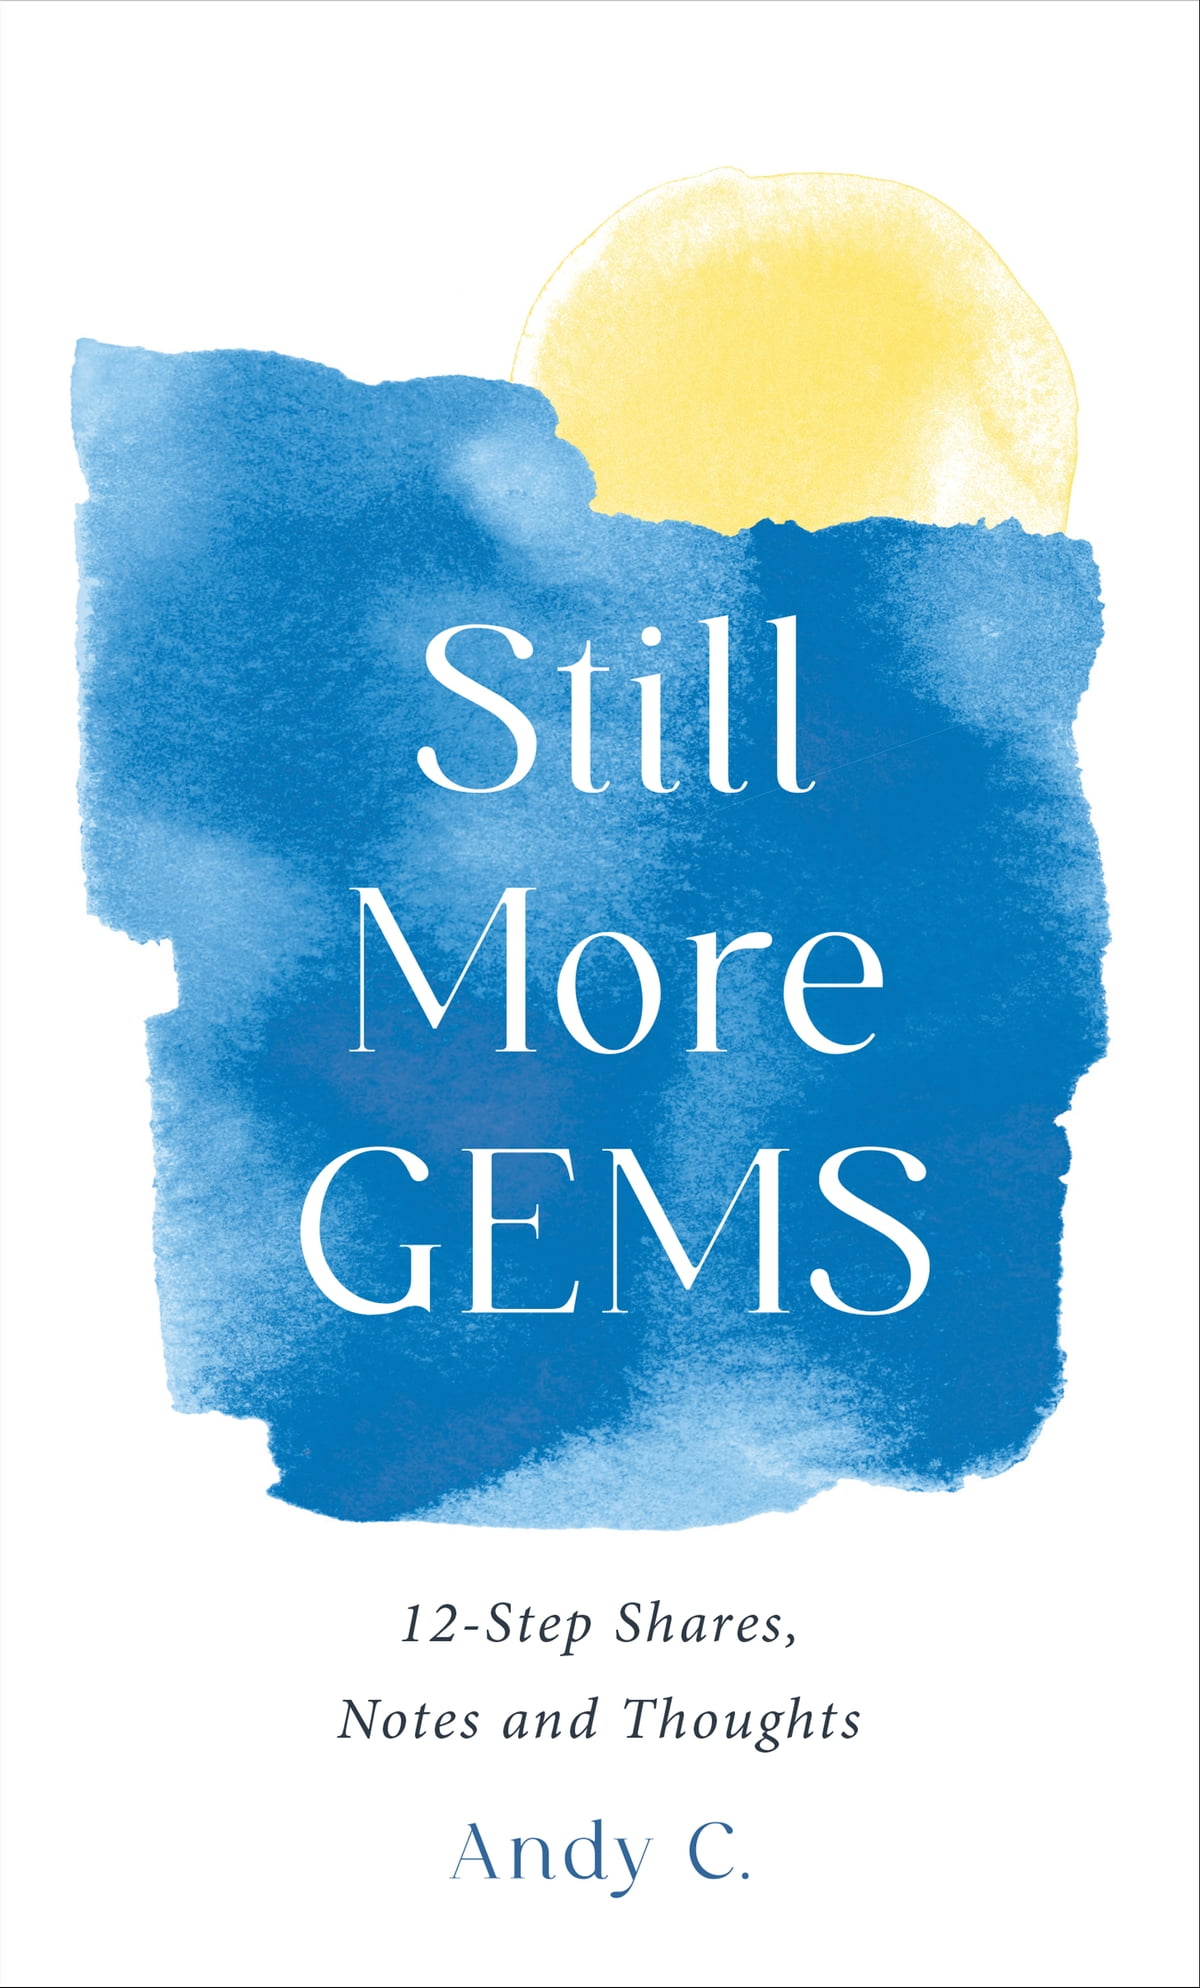 Author of Still More Gems joins Talk Recovery Radio